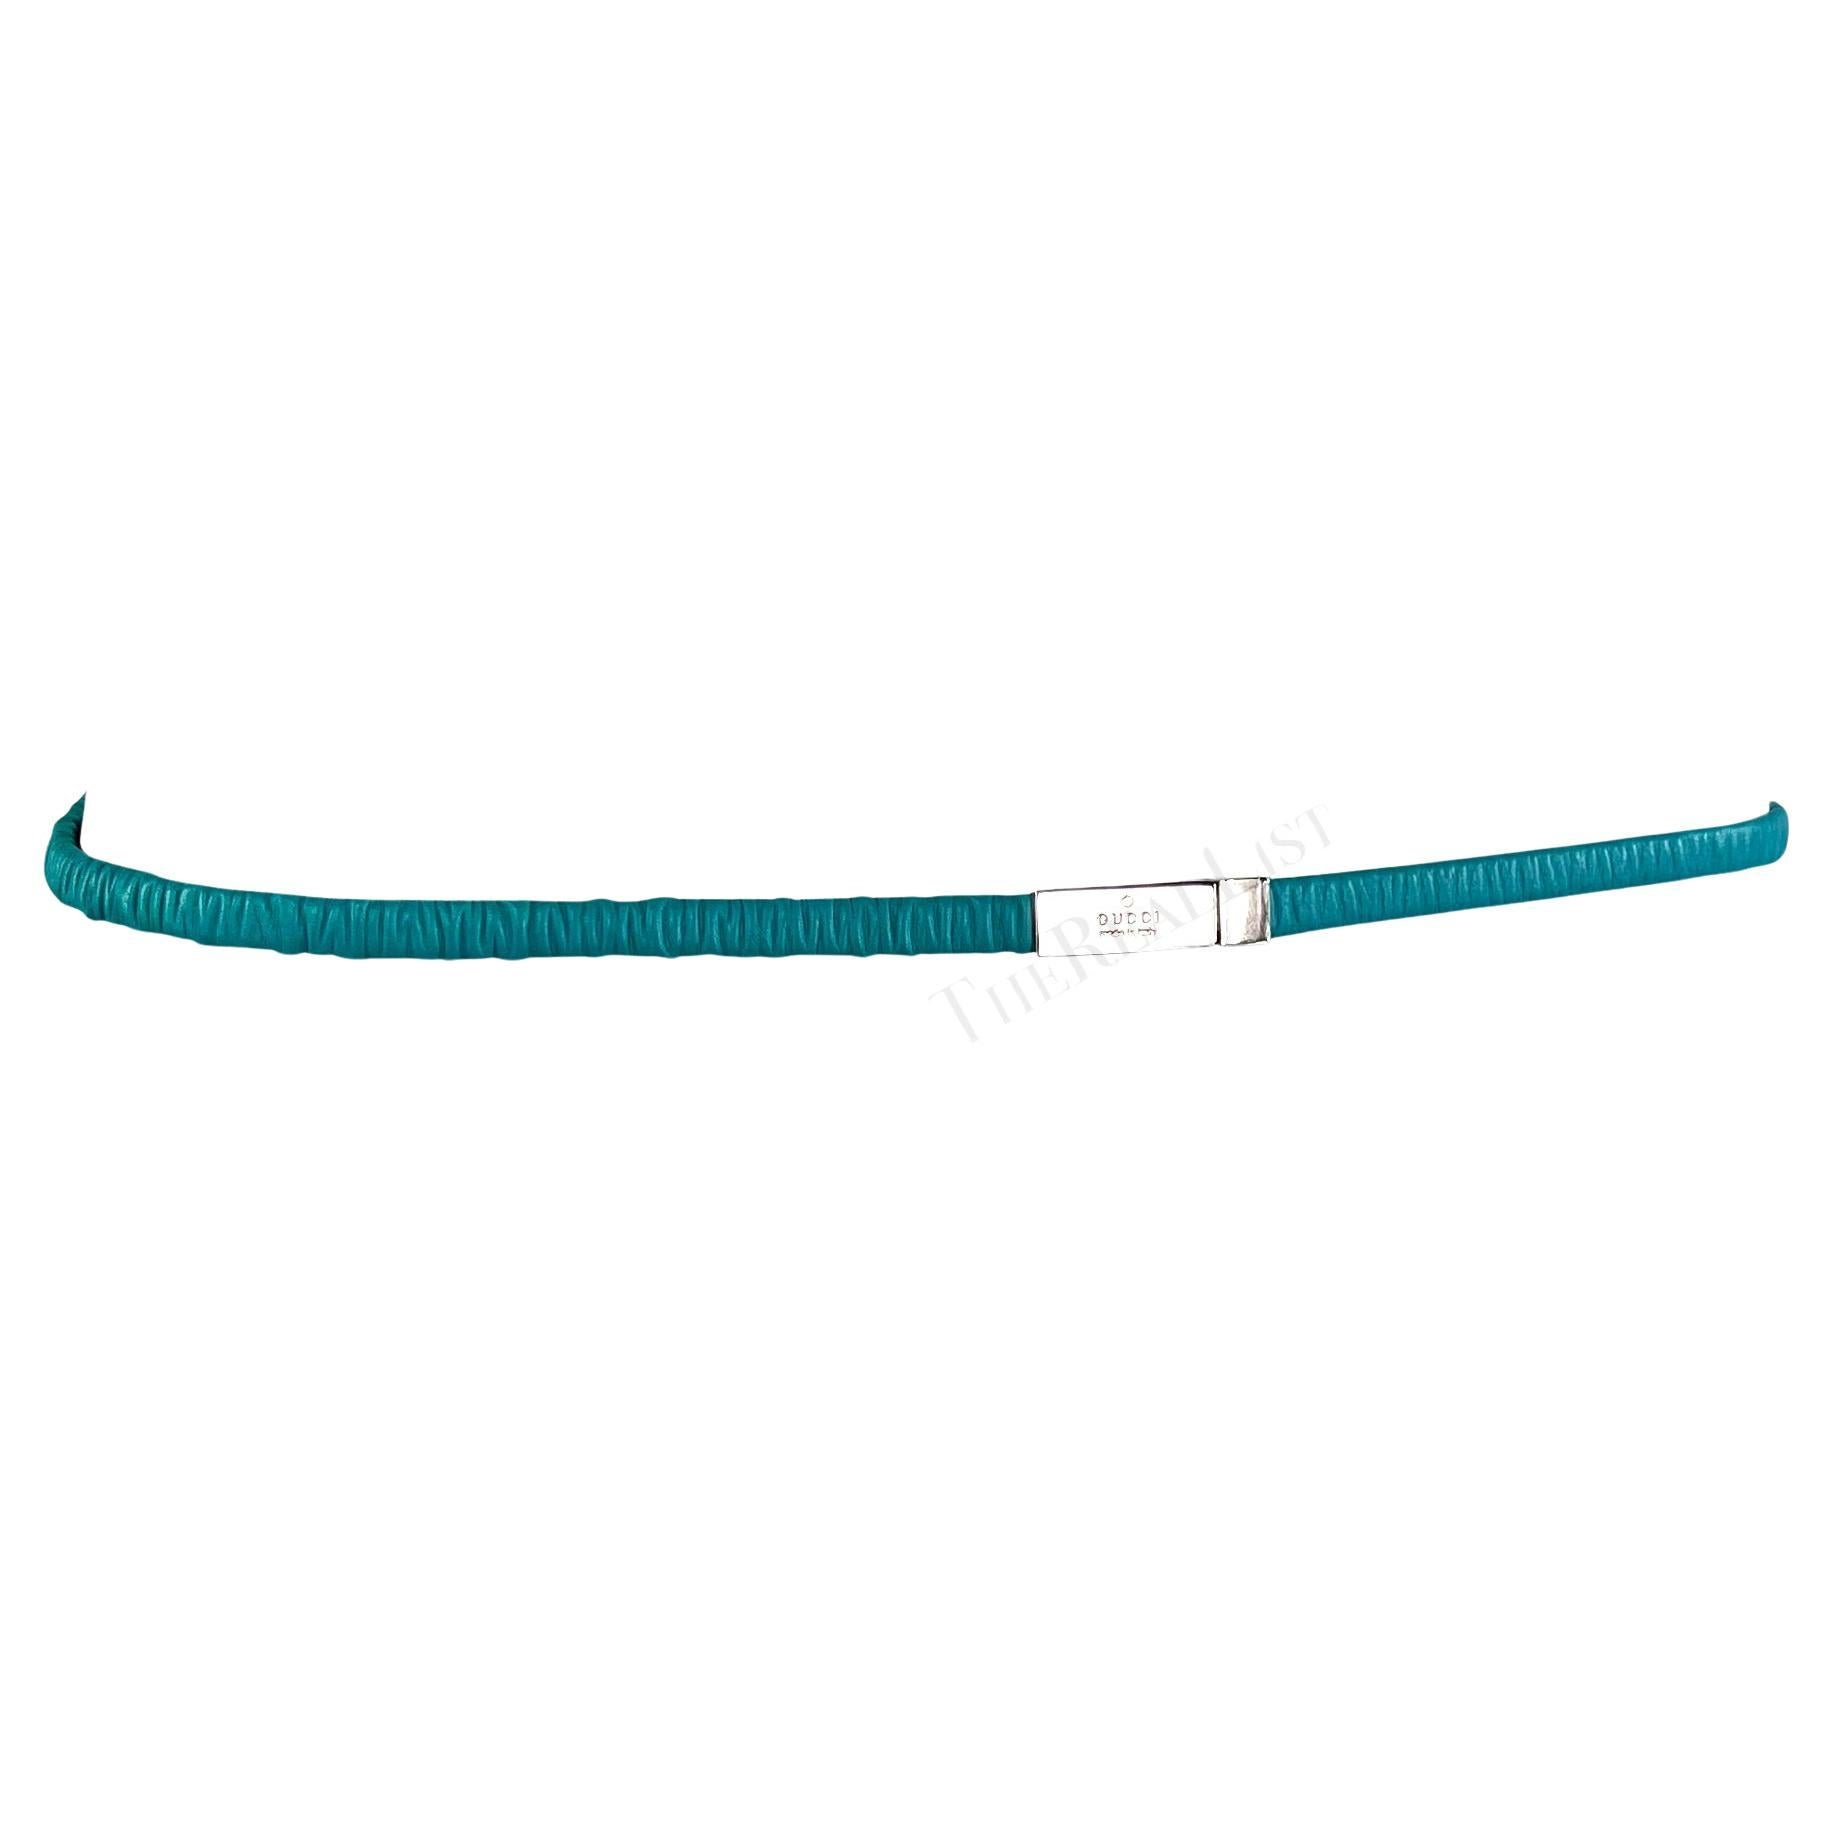 S/S 1999 Gucci by Tom Ford Runway Elasticized Teal Leather Logo Thin Belt For Sale